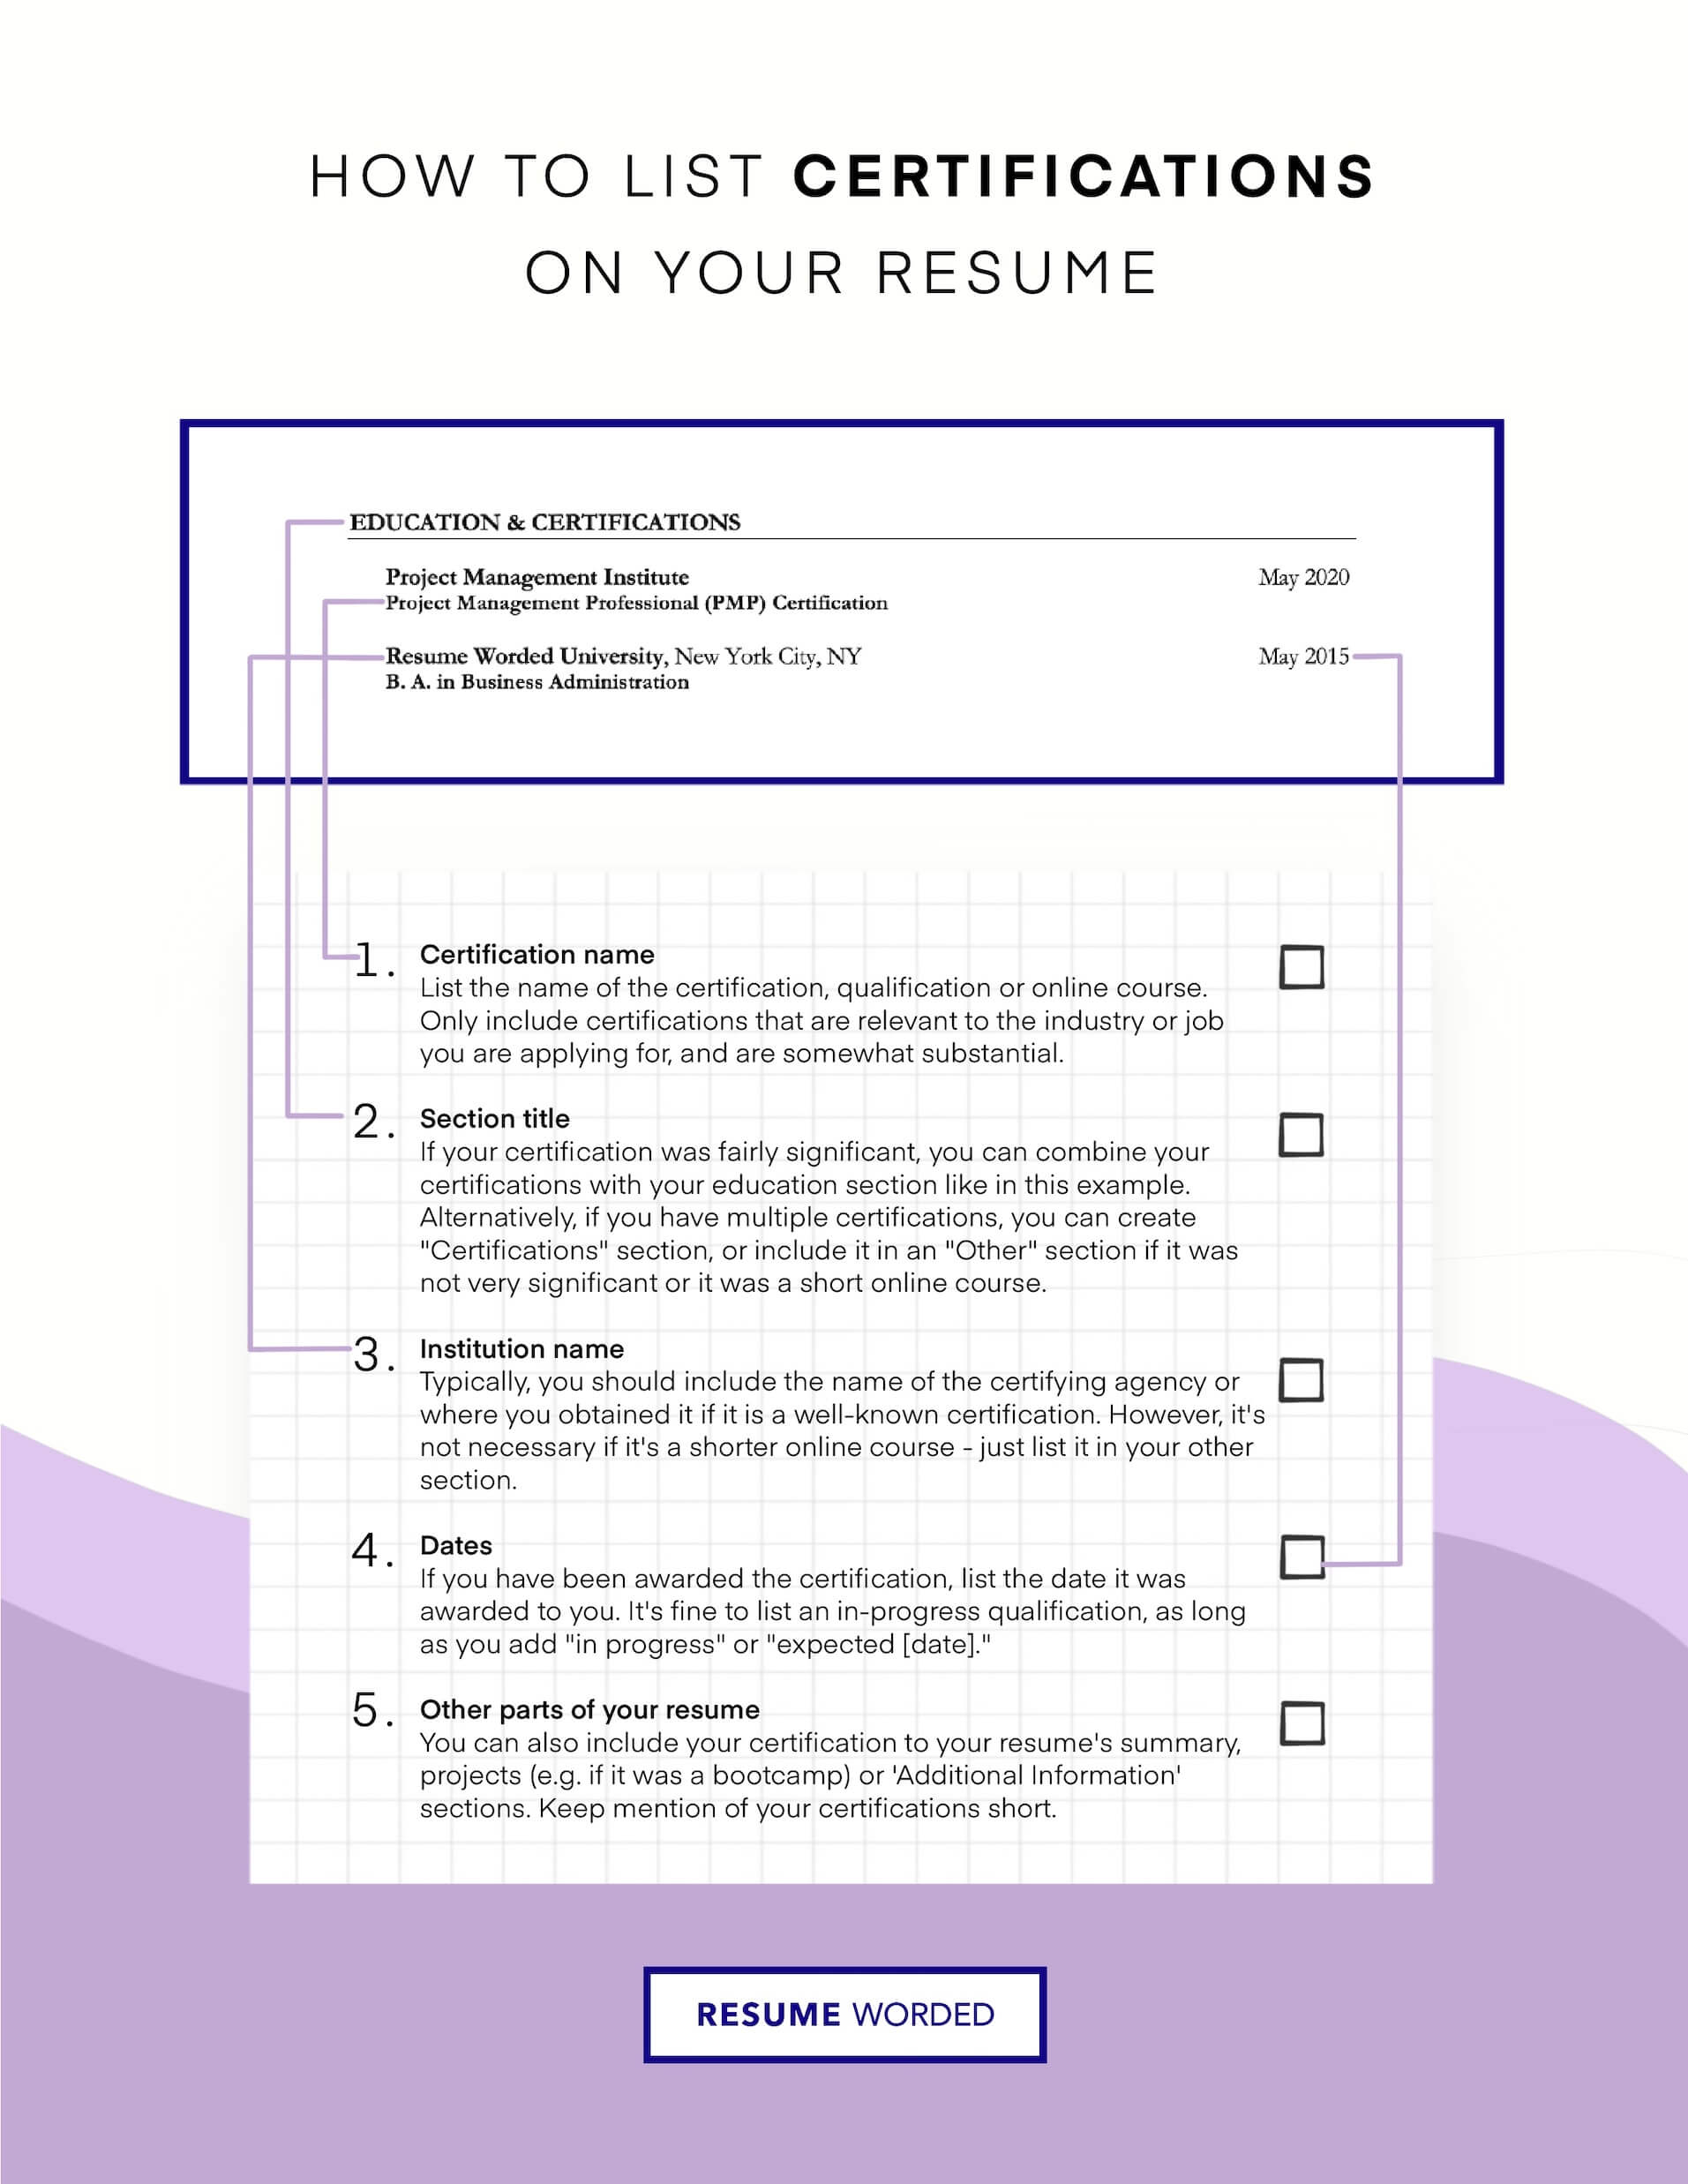 Where relevant, you can list additional certifications relevant to E-Commerce roles - E-Commerce Chief Financial Officer Resume